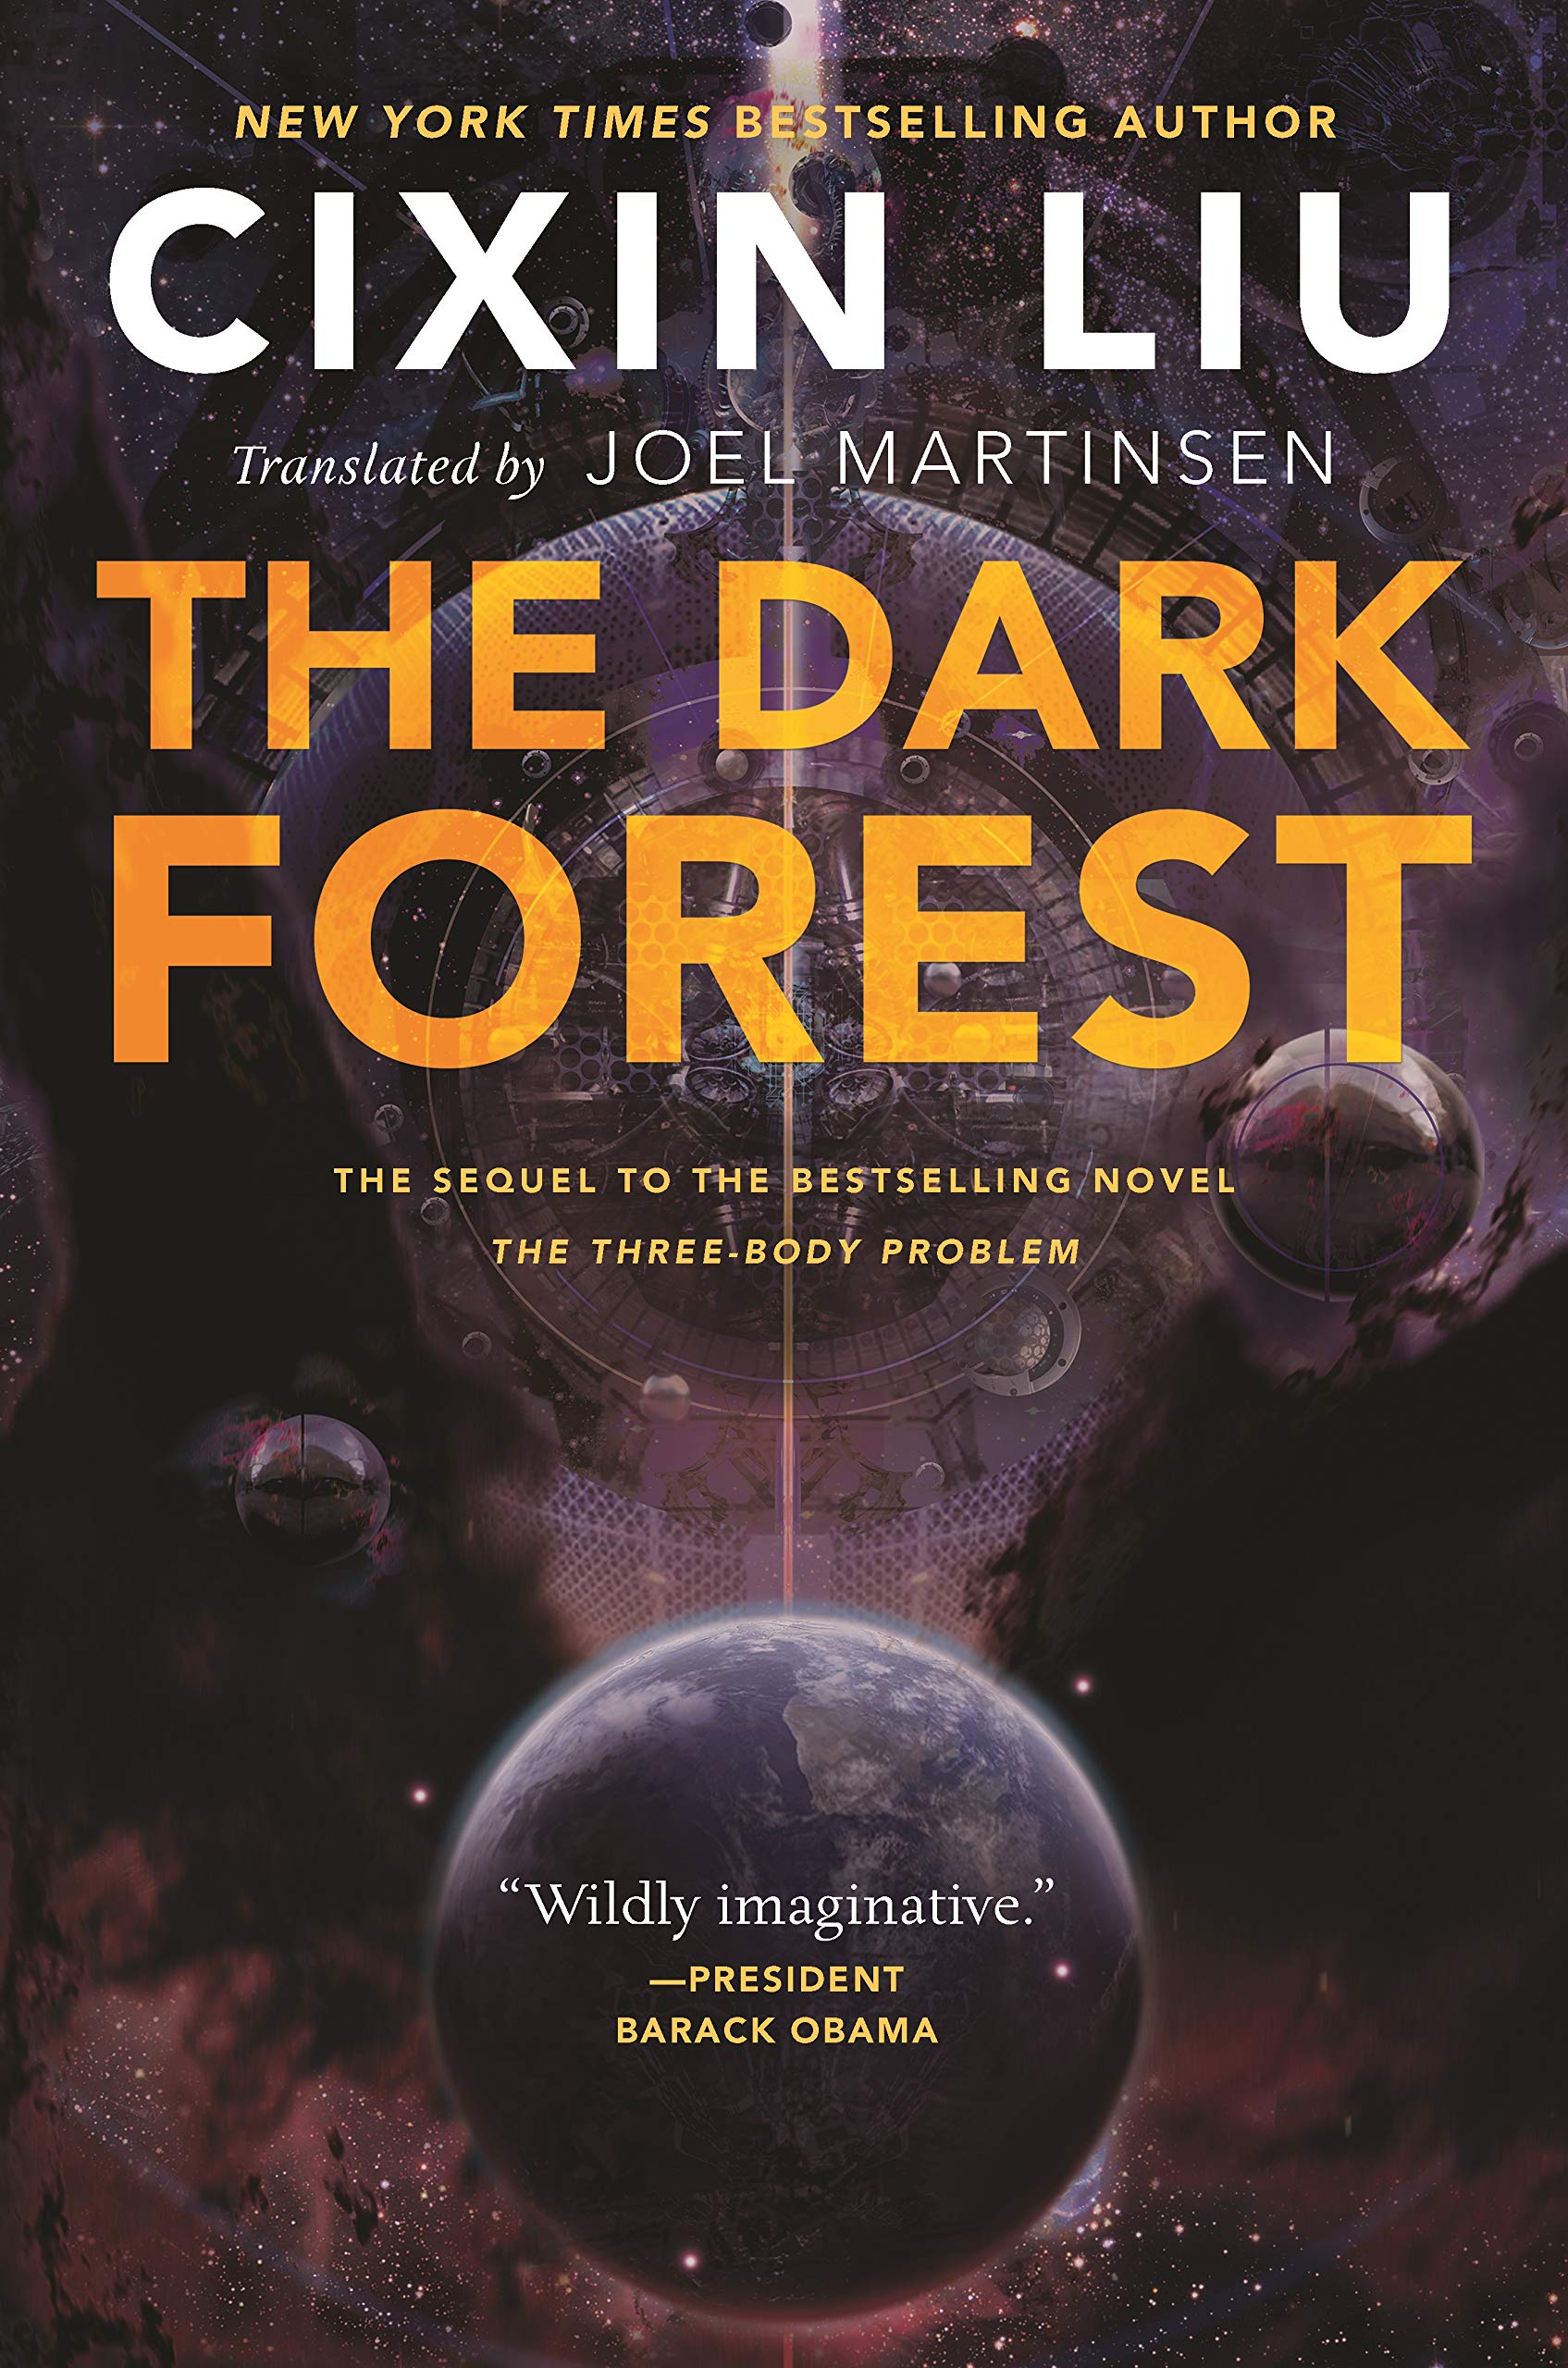 Review of Cixin Liu’s “The Dark Forest”